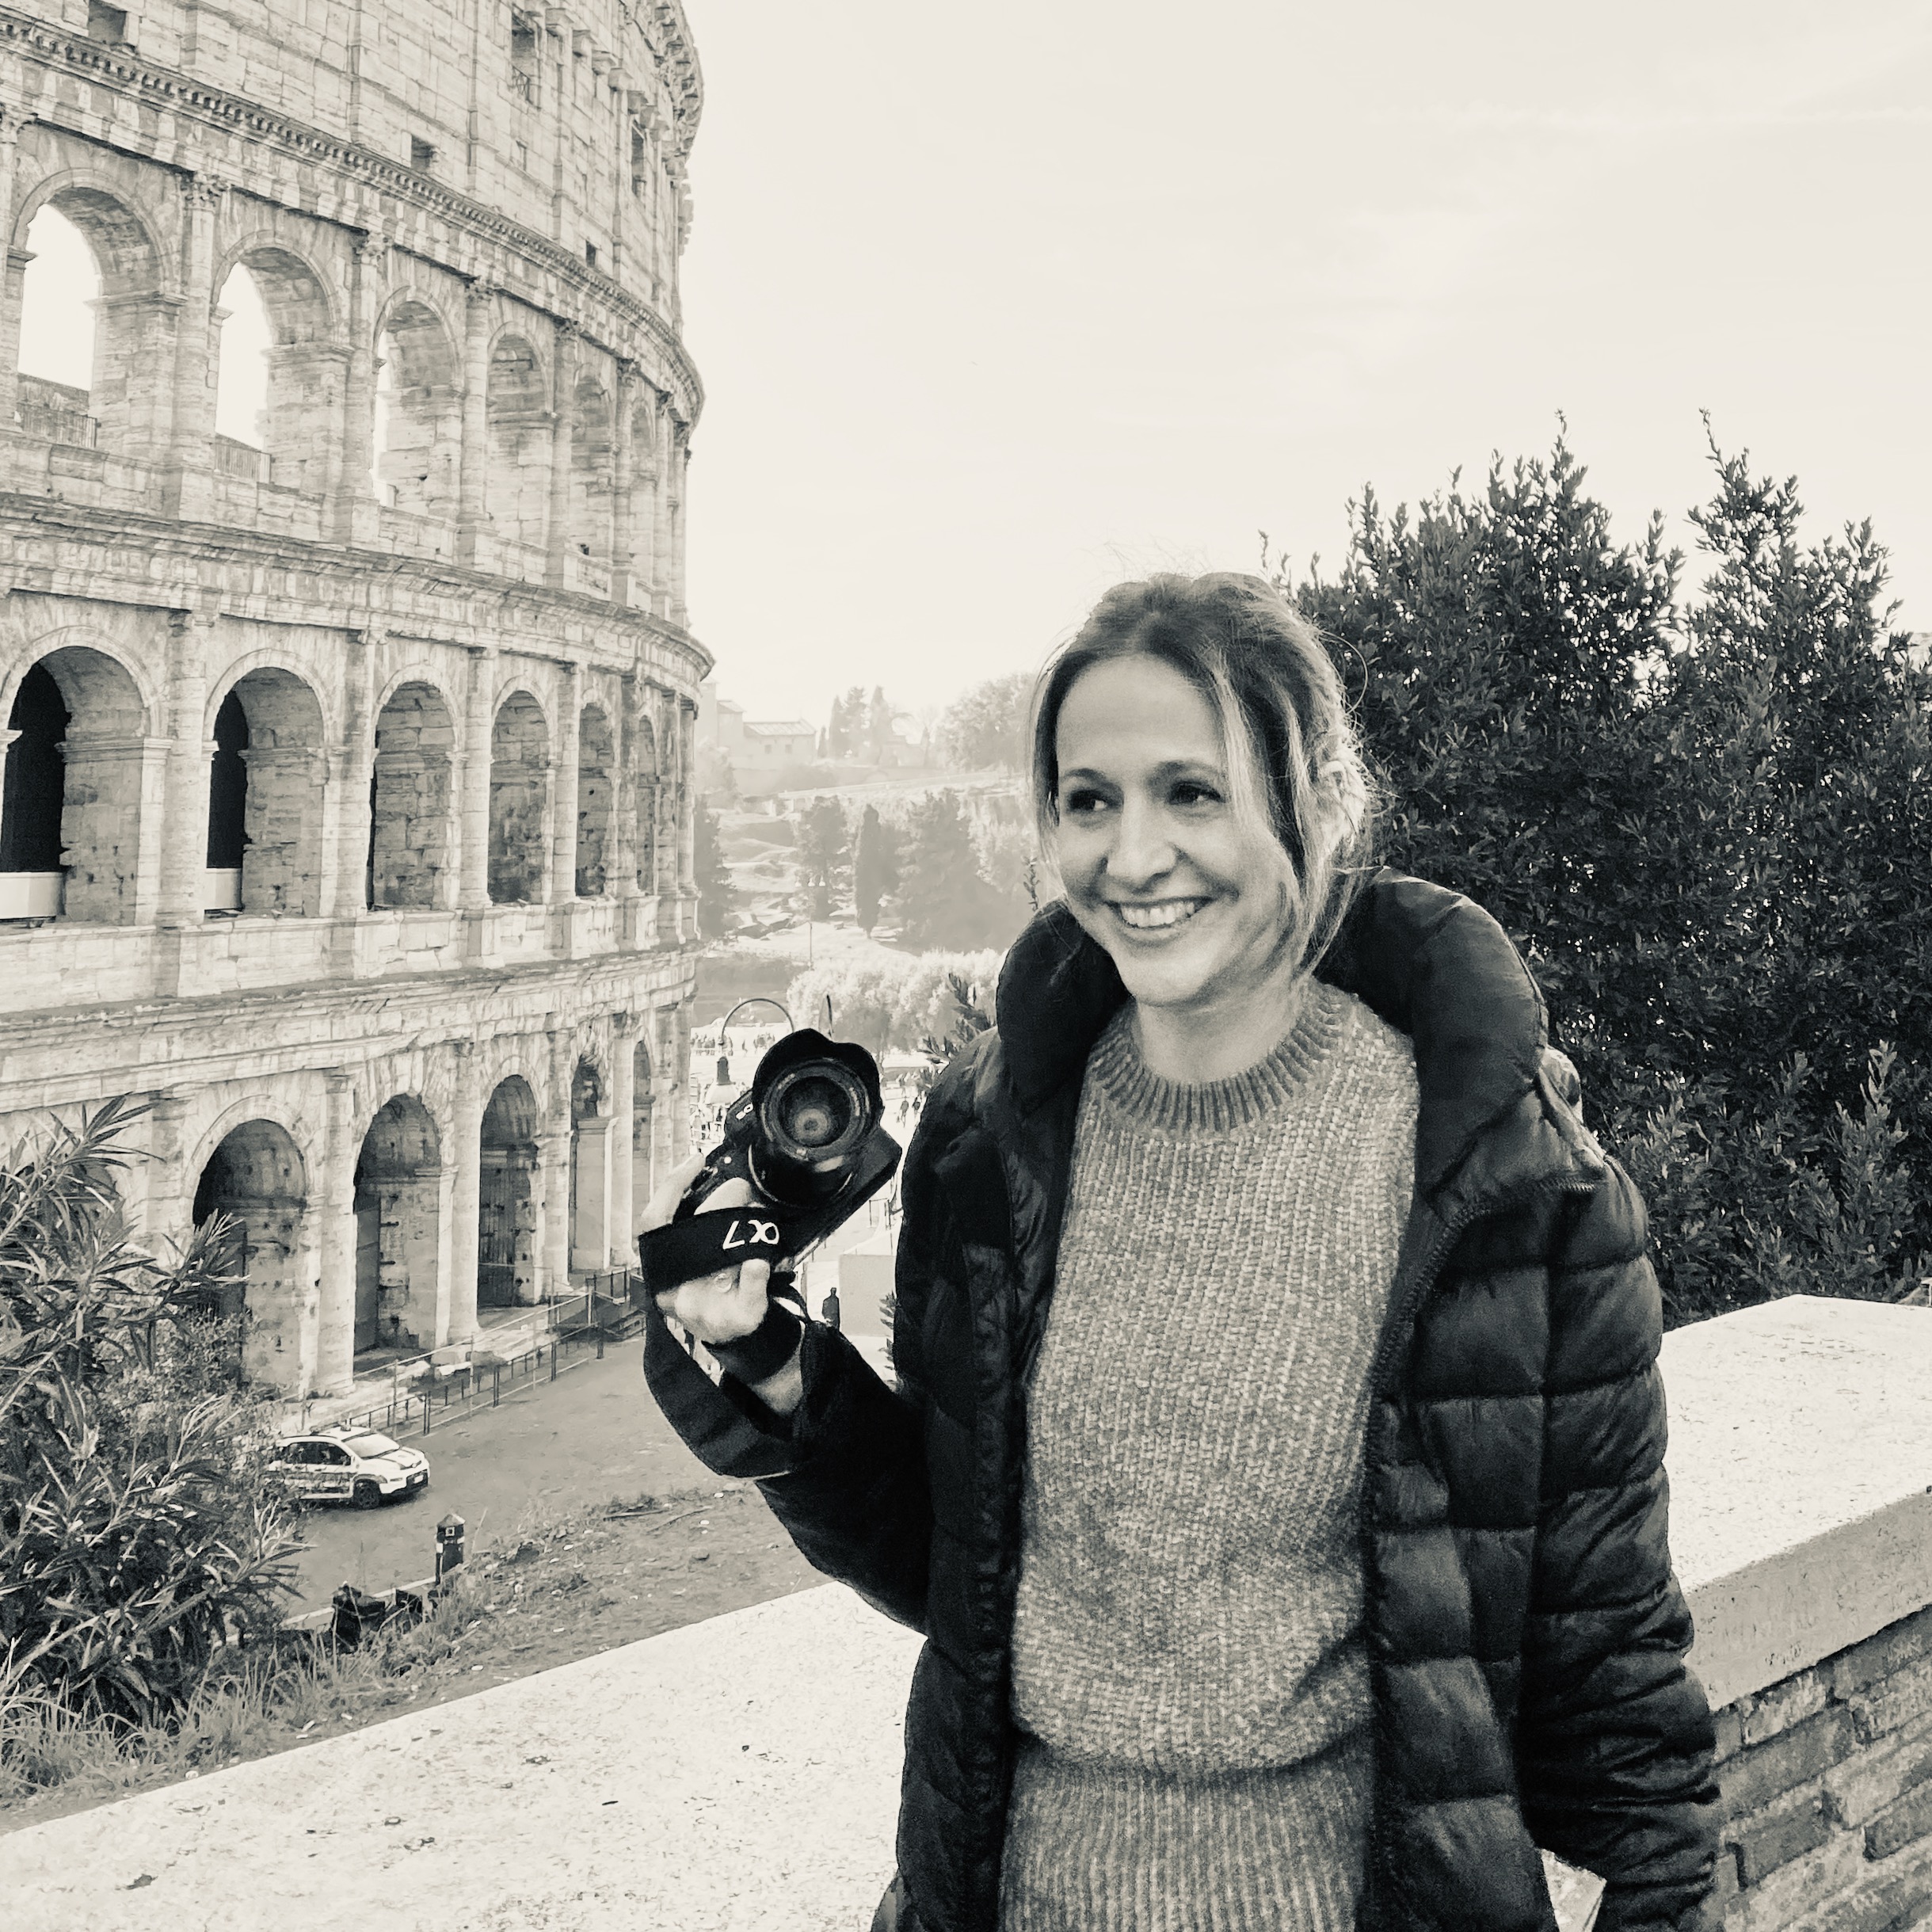 nna Nagy stands in front of the Colosseum. As a professional photographer in Rome, she captures the city's essence through her lens.